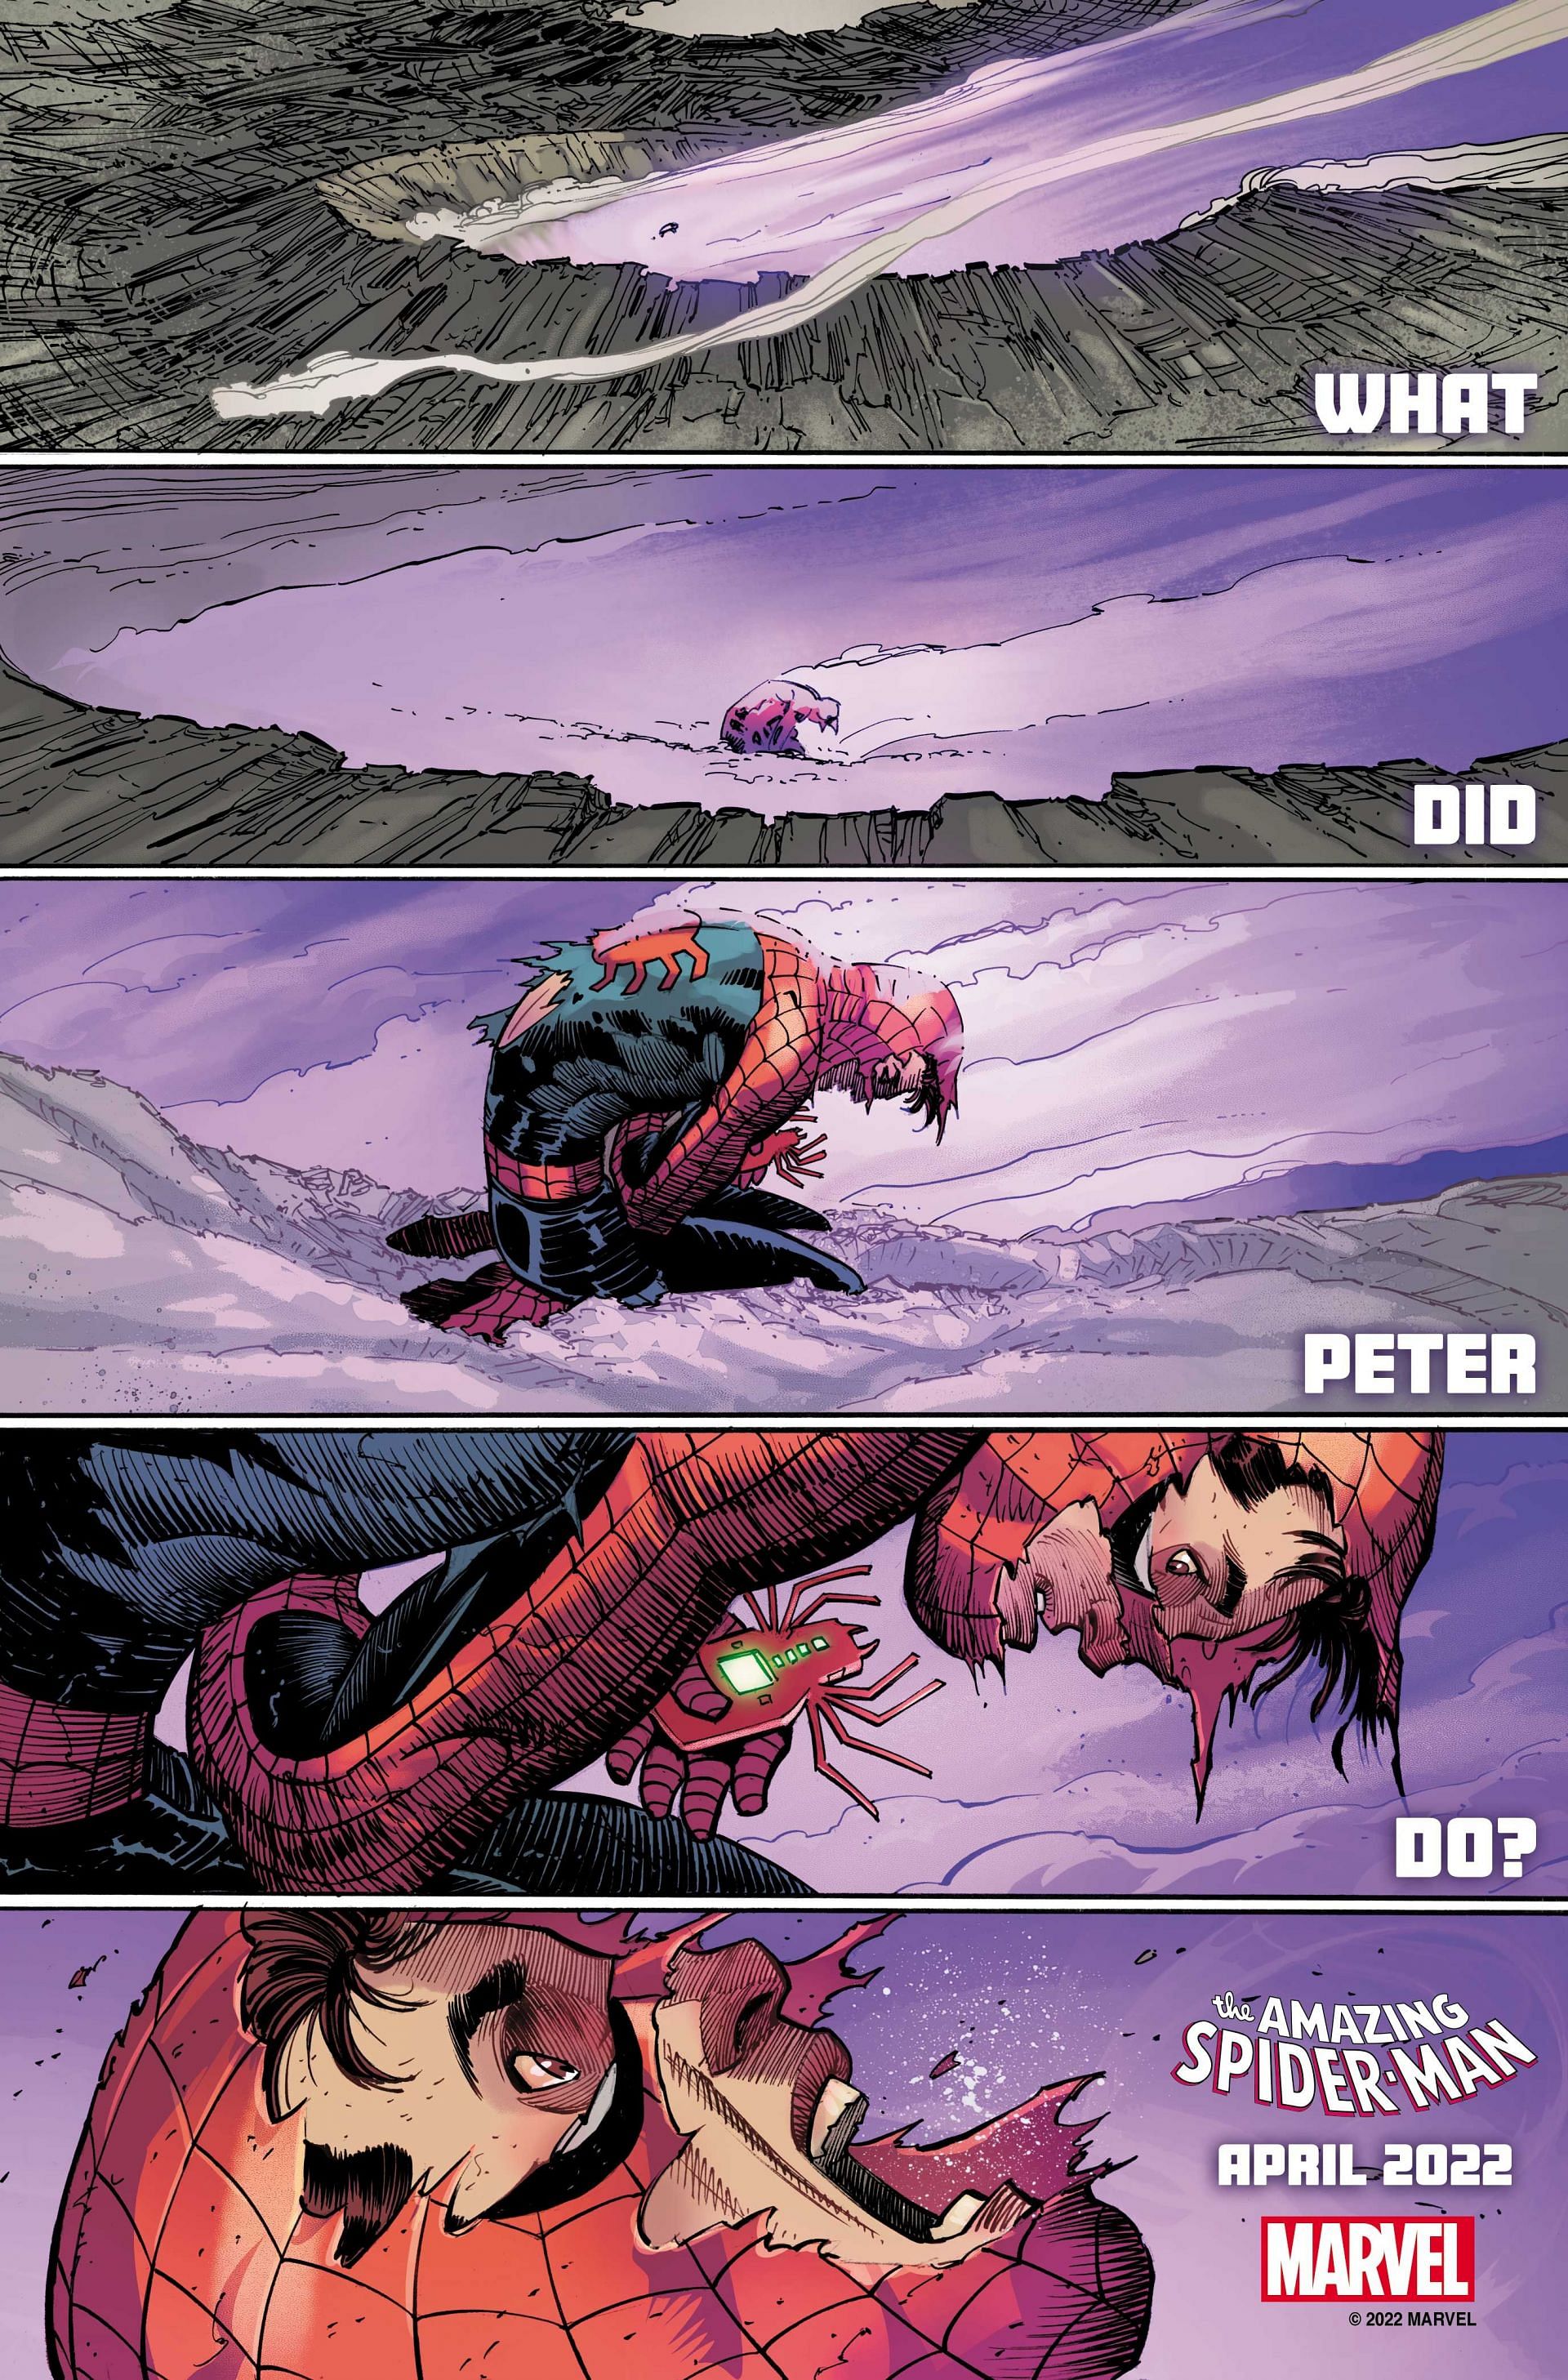 A preview of the sequence of what did Peter do (Image via Marvel)